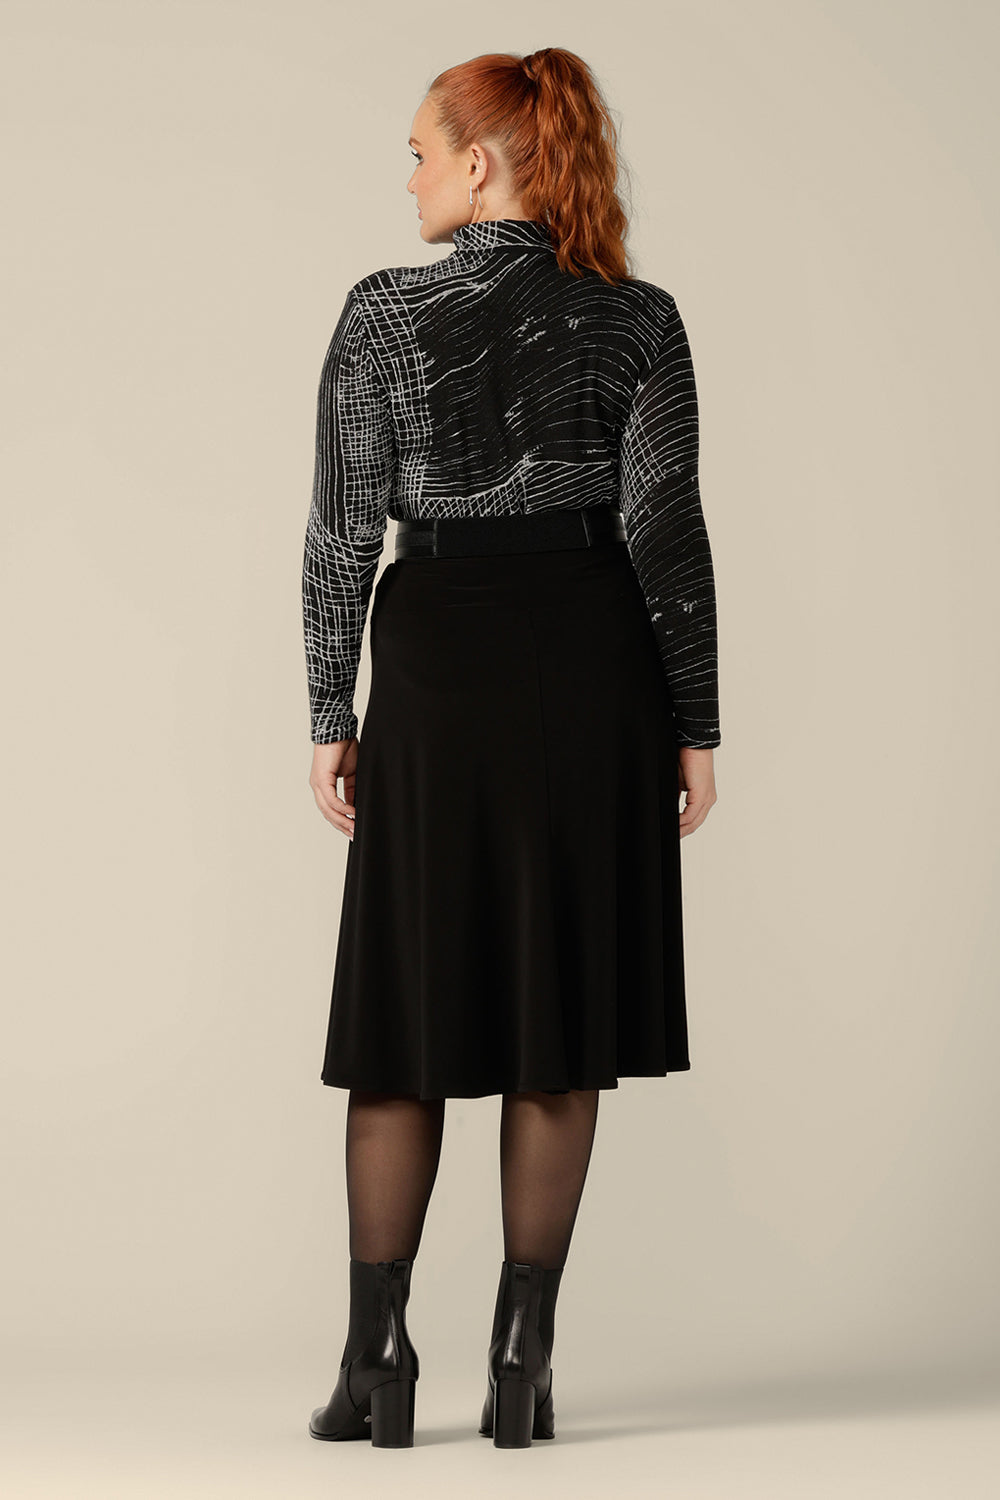 Back view of a curvy woman wearing a long sleeve, woolly knit turtleneck top, size 12, in an abstract black and white pattern. A warm winter top, this women's poloneck top is worn with a flared, knee length black skirt and faux leather belt. 